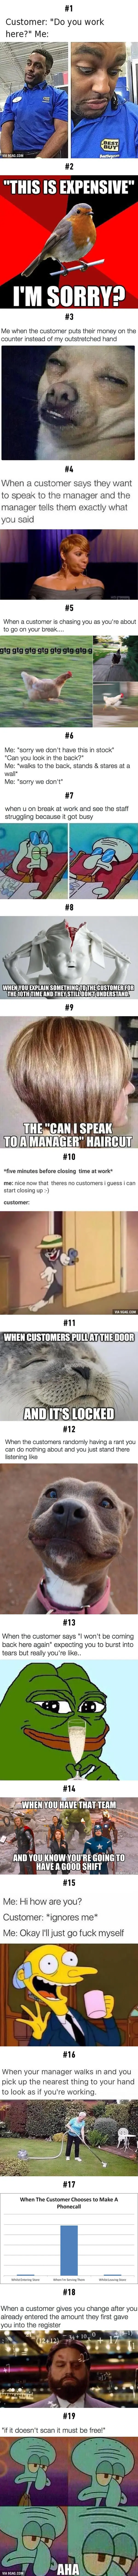 19-funny-images-all-retail-workers-will-identify-with